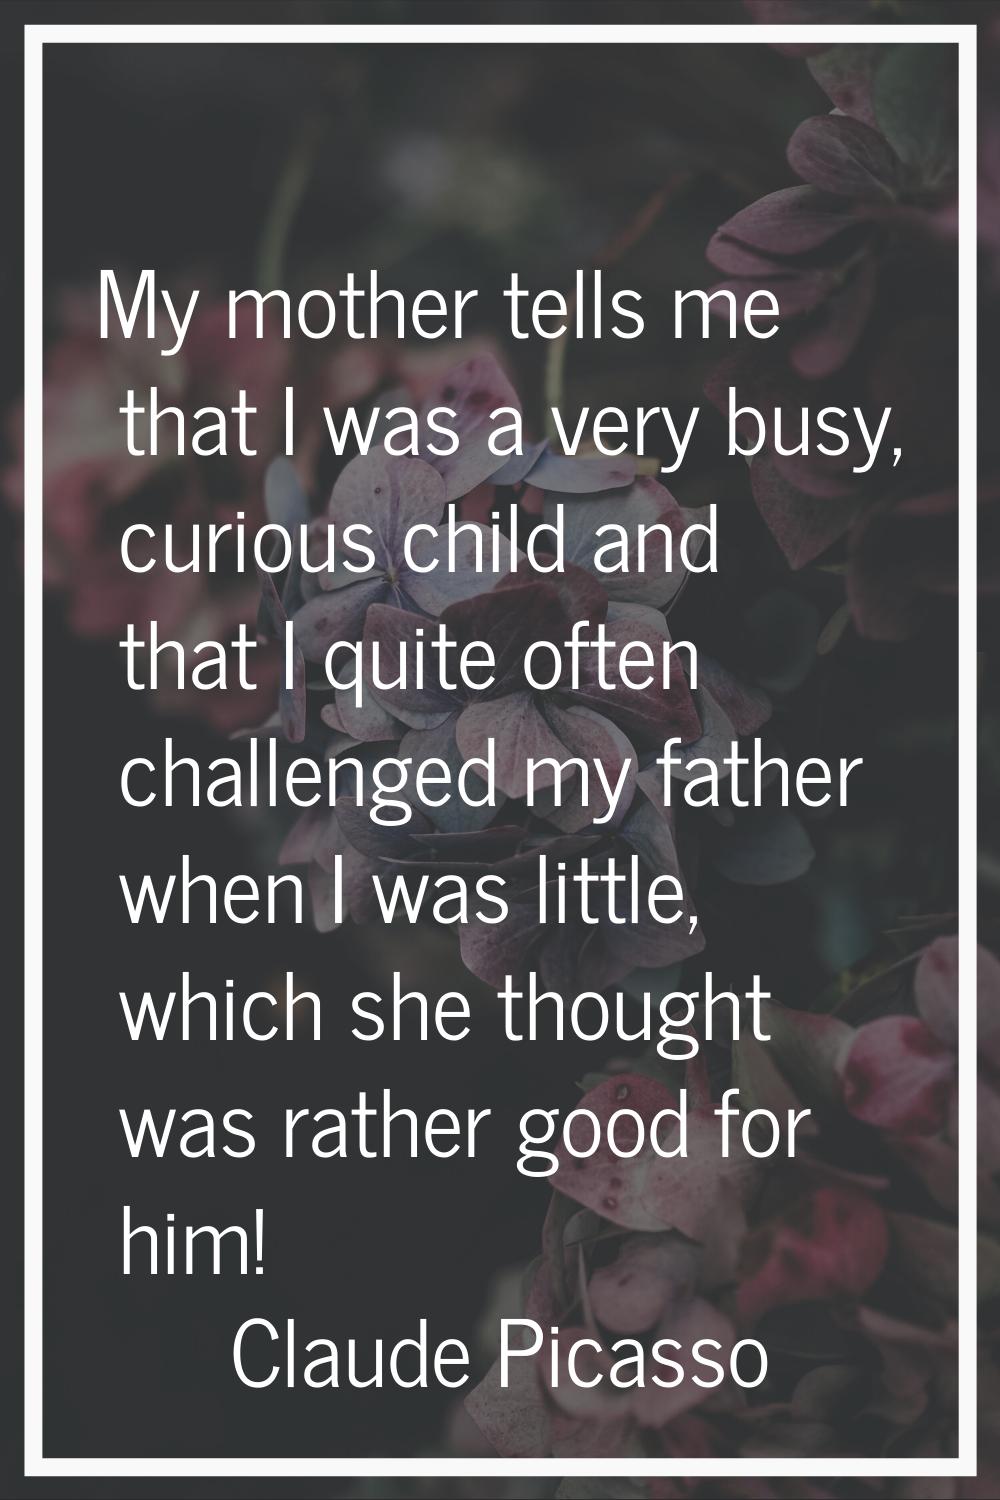 My mother tells me that I was a very busy, curious child and that I quite often challenged my fathe